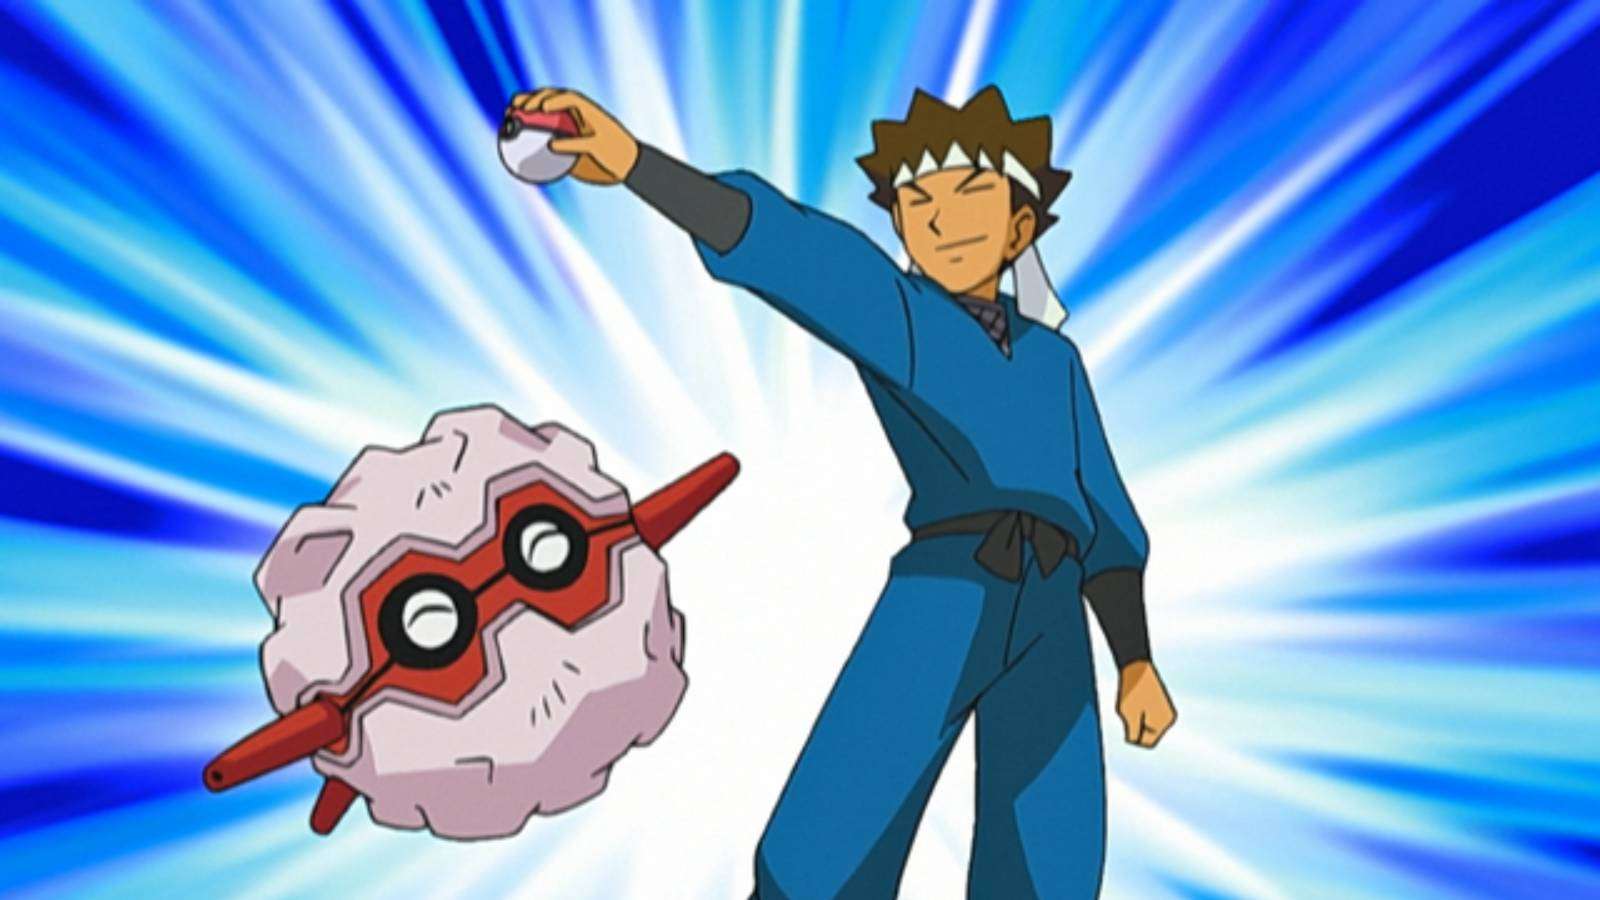 Pokemon character Brock stands posing with his Pokemon Forretress